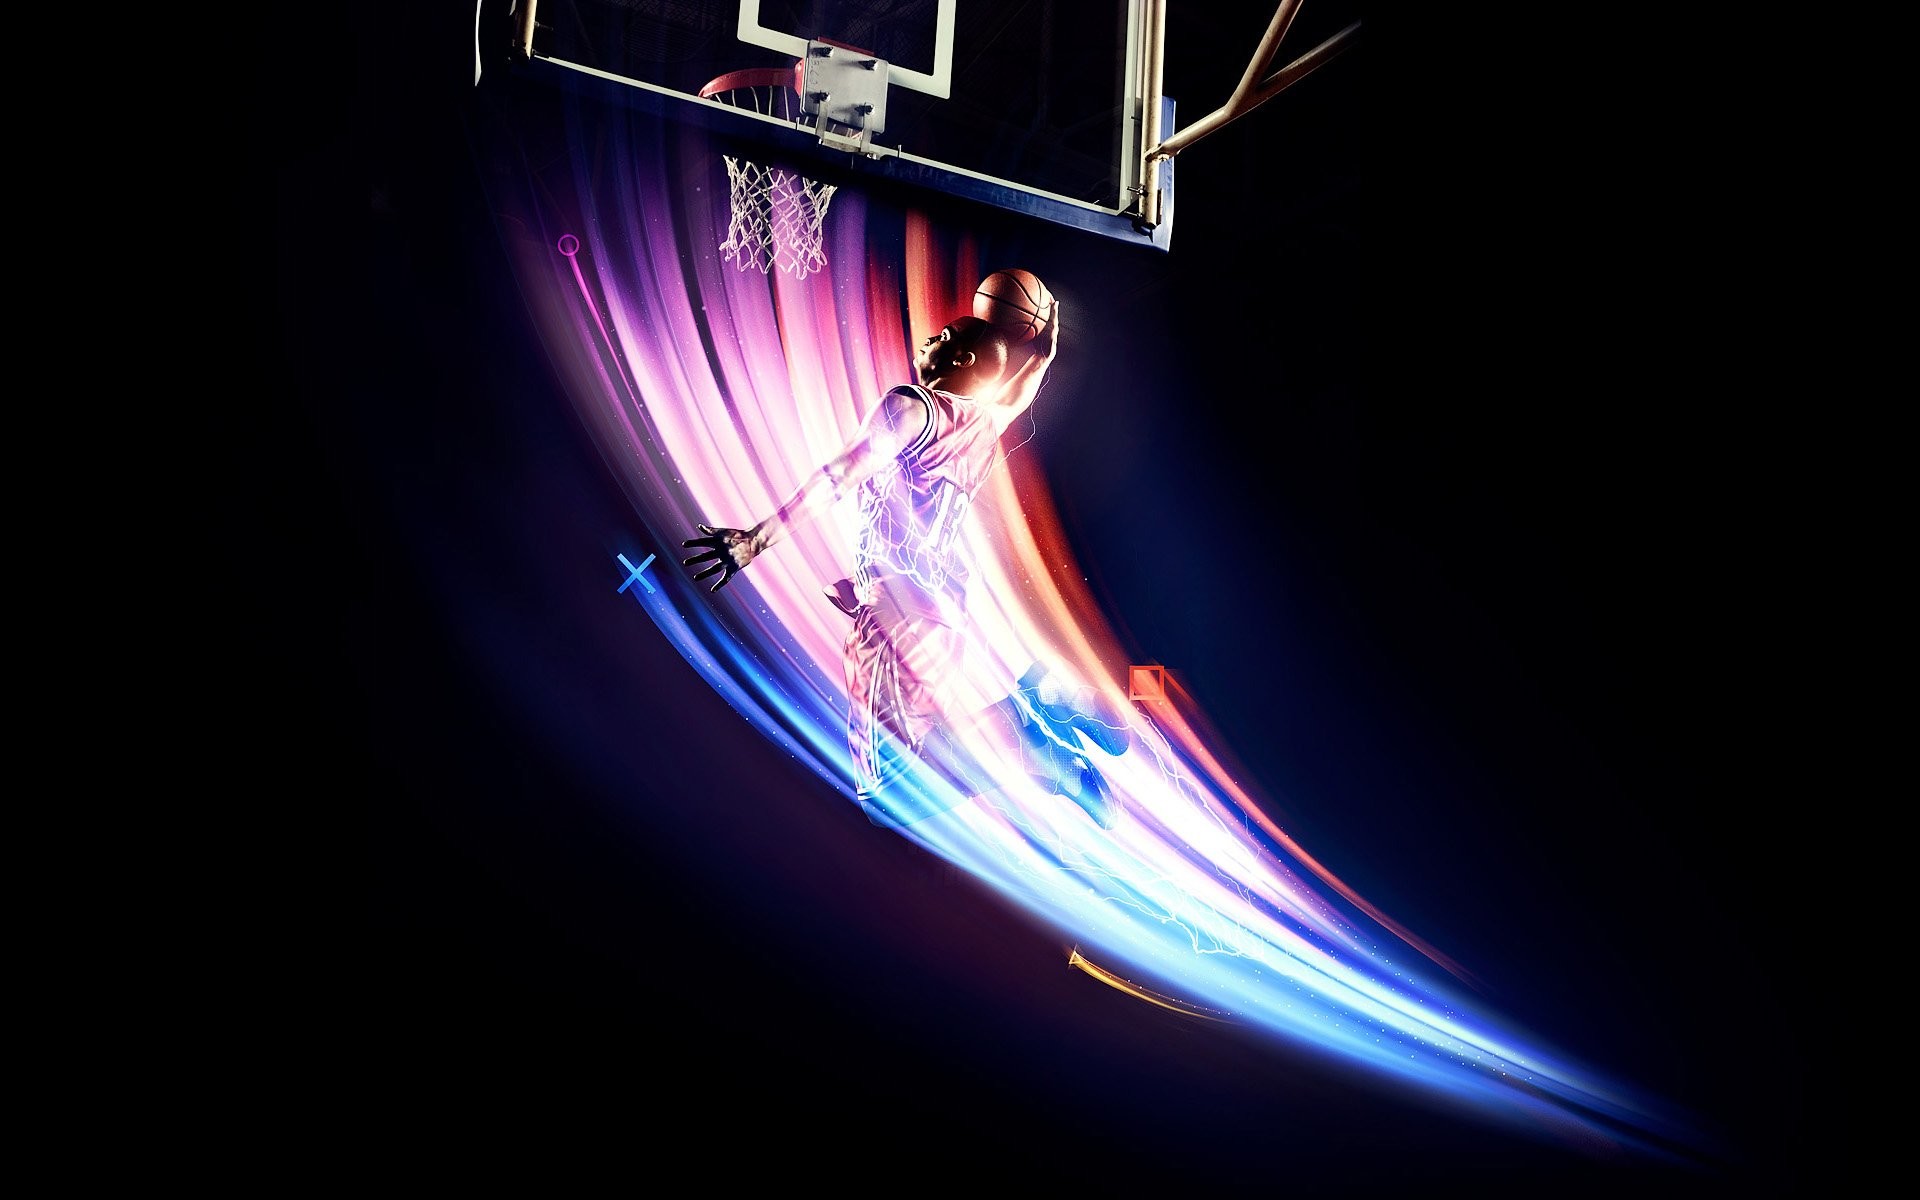 Basketball Wallpaper Hd For Android 1920x1200